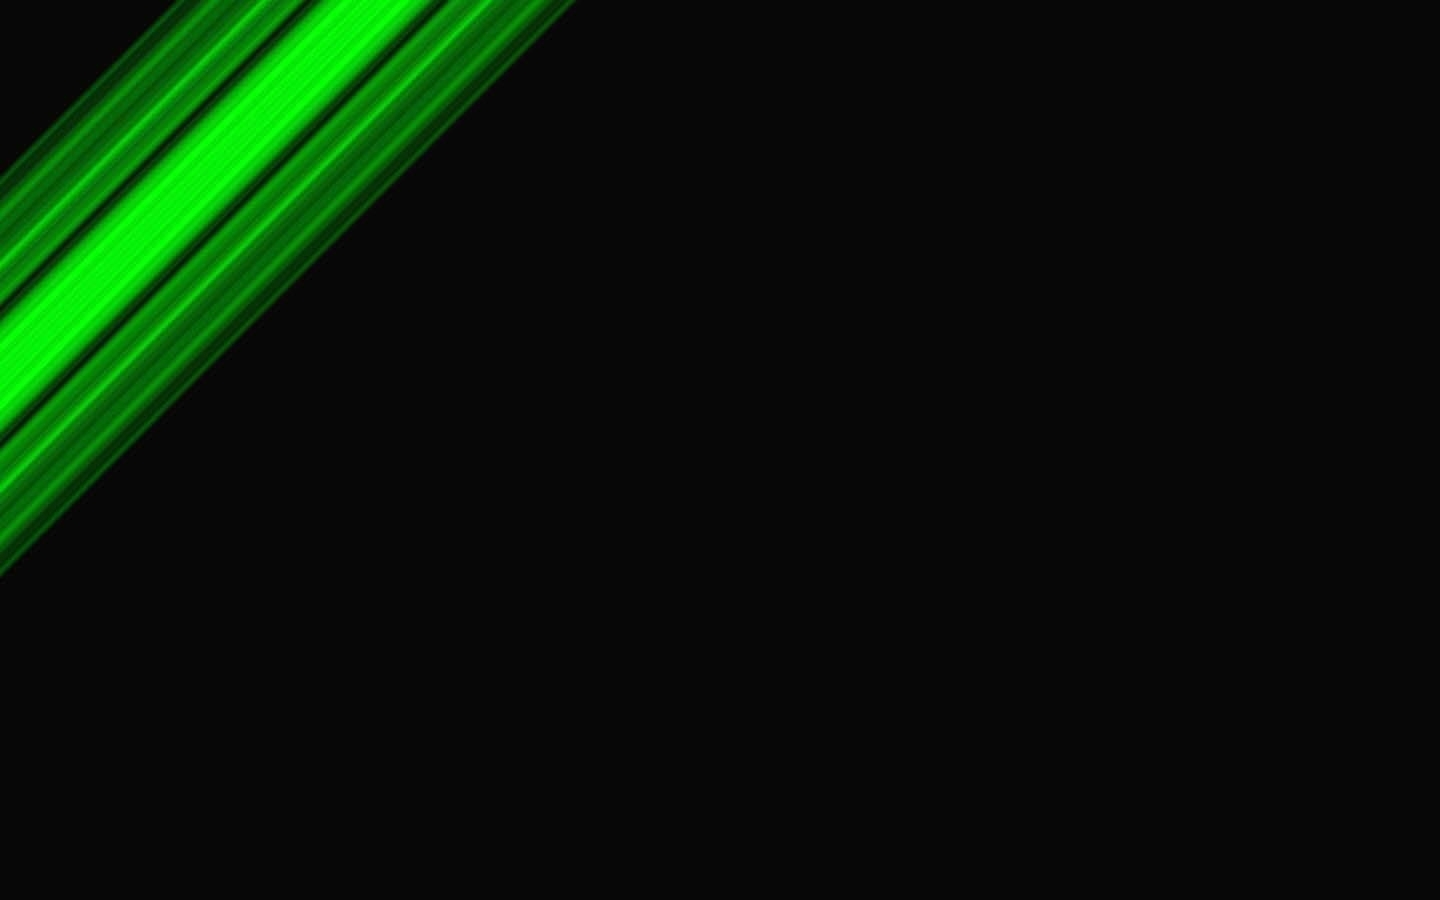 10 Best Black And Green Abstract Wallpaper FULL HD 1920×1080 For PC Desktop